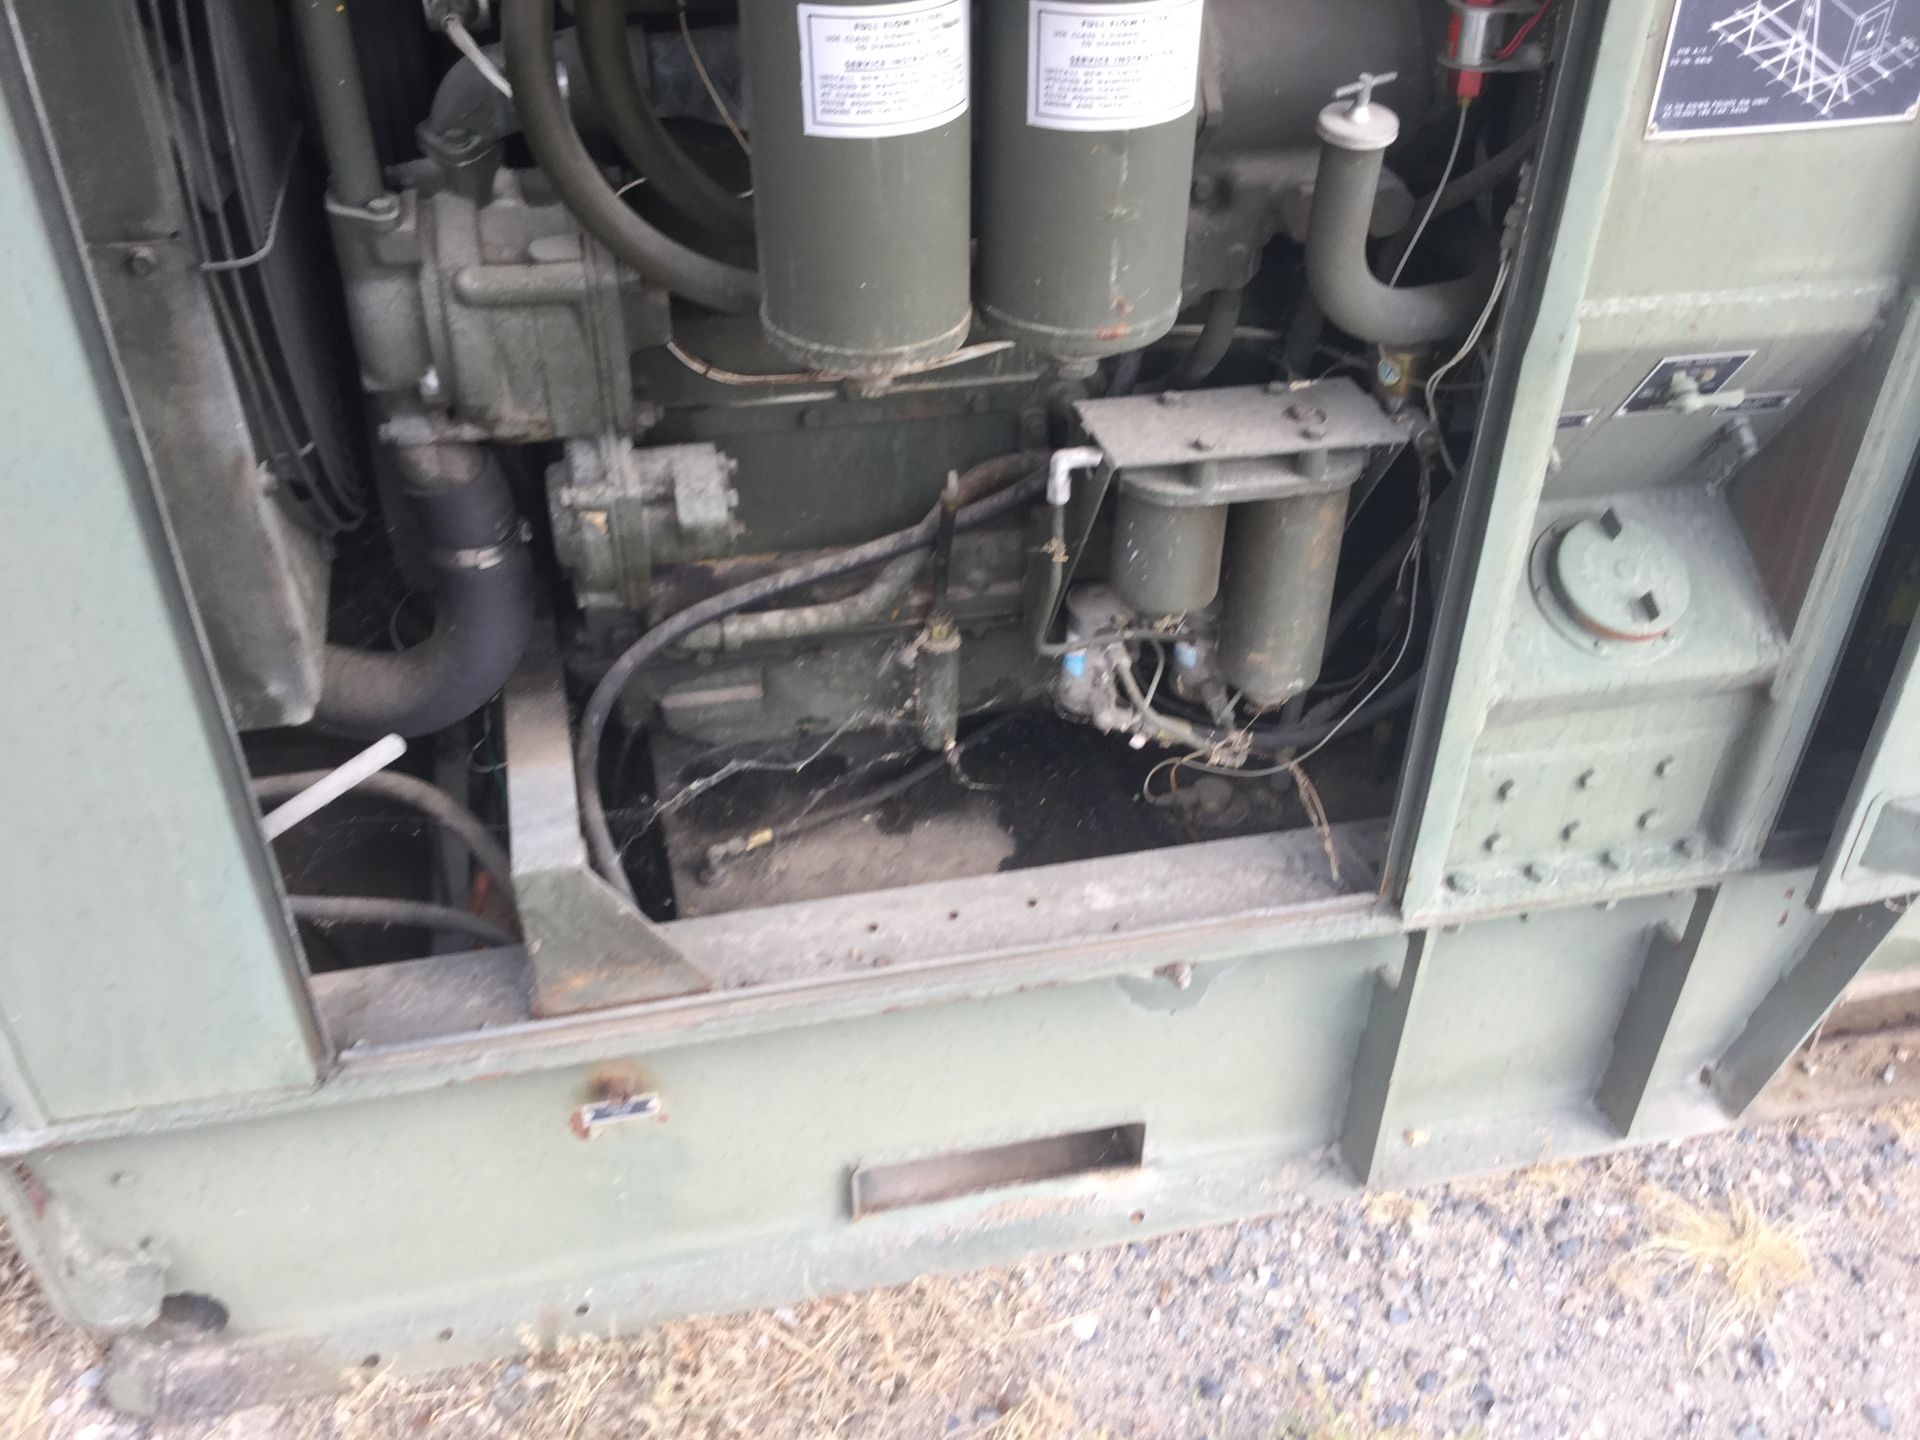 Year: 1973 Make: Consolidated Model: MEP007A Type: Generator Vin#: UZ00125 Mileage/Hours: unknown - Image 3 of 4